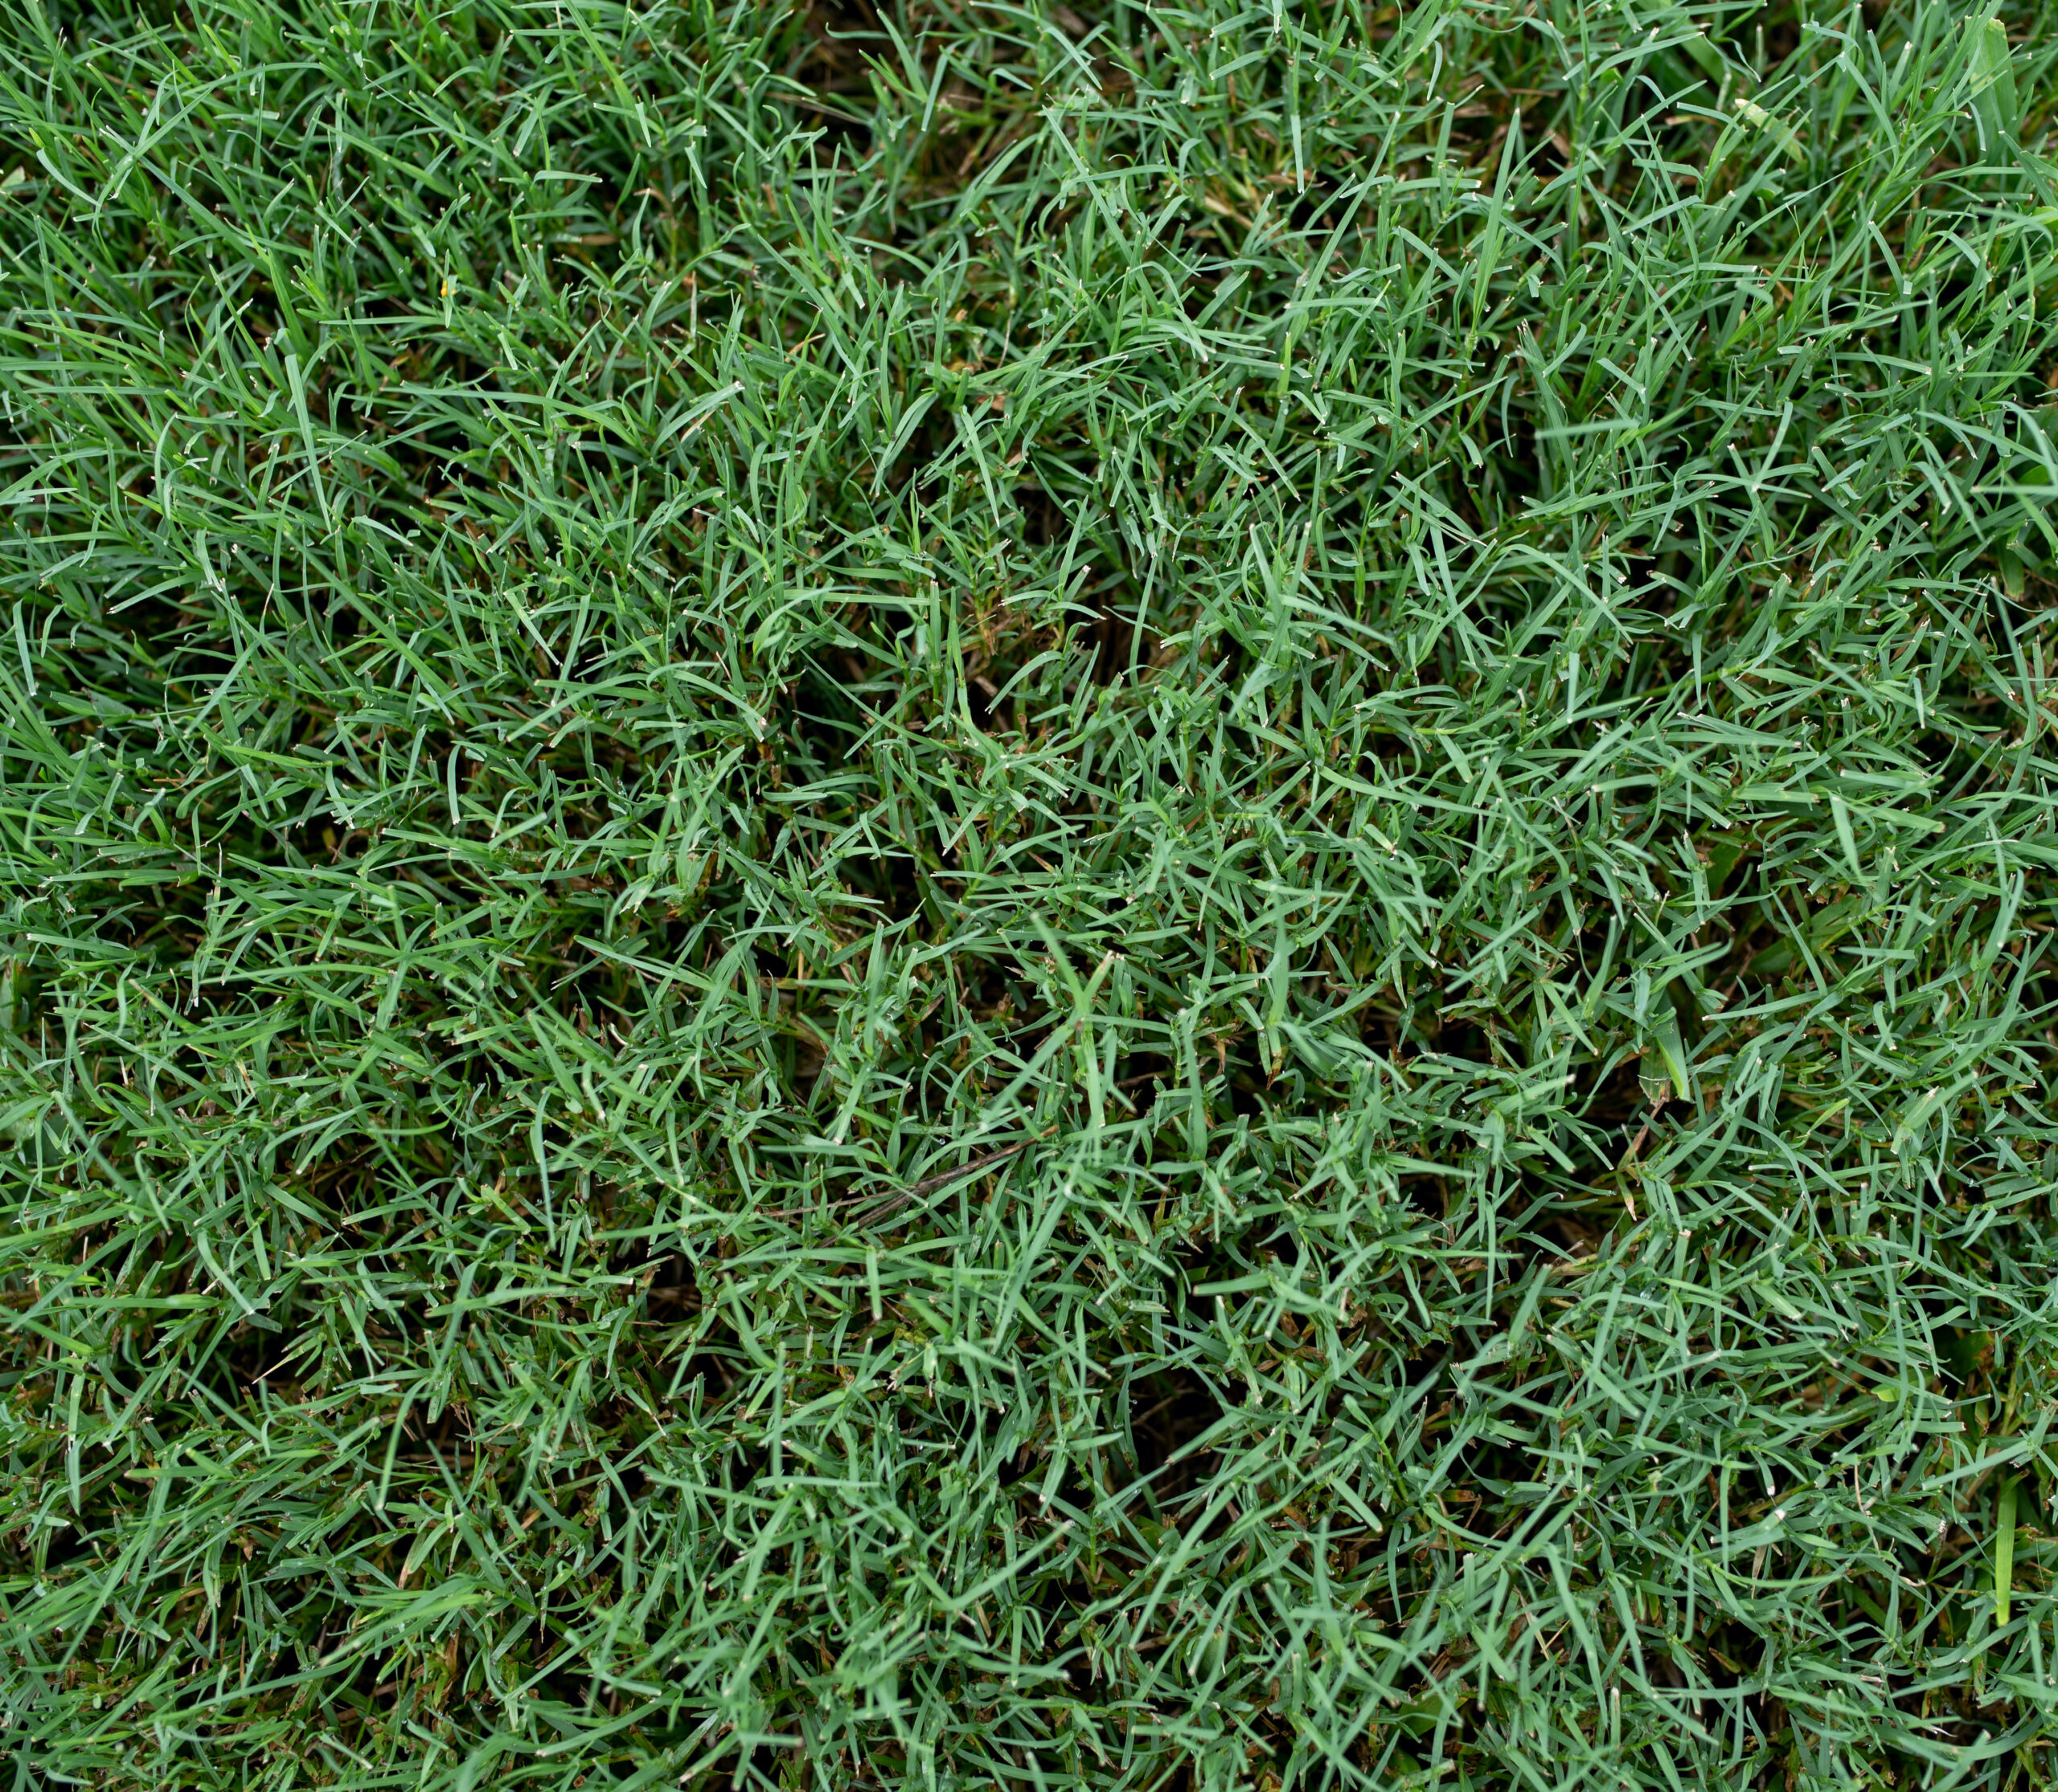 Lawn Care for Southern Grass